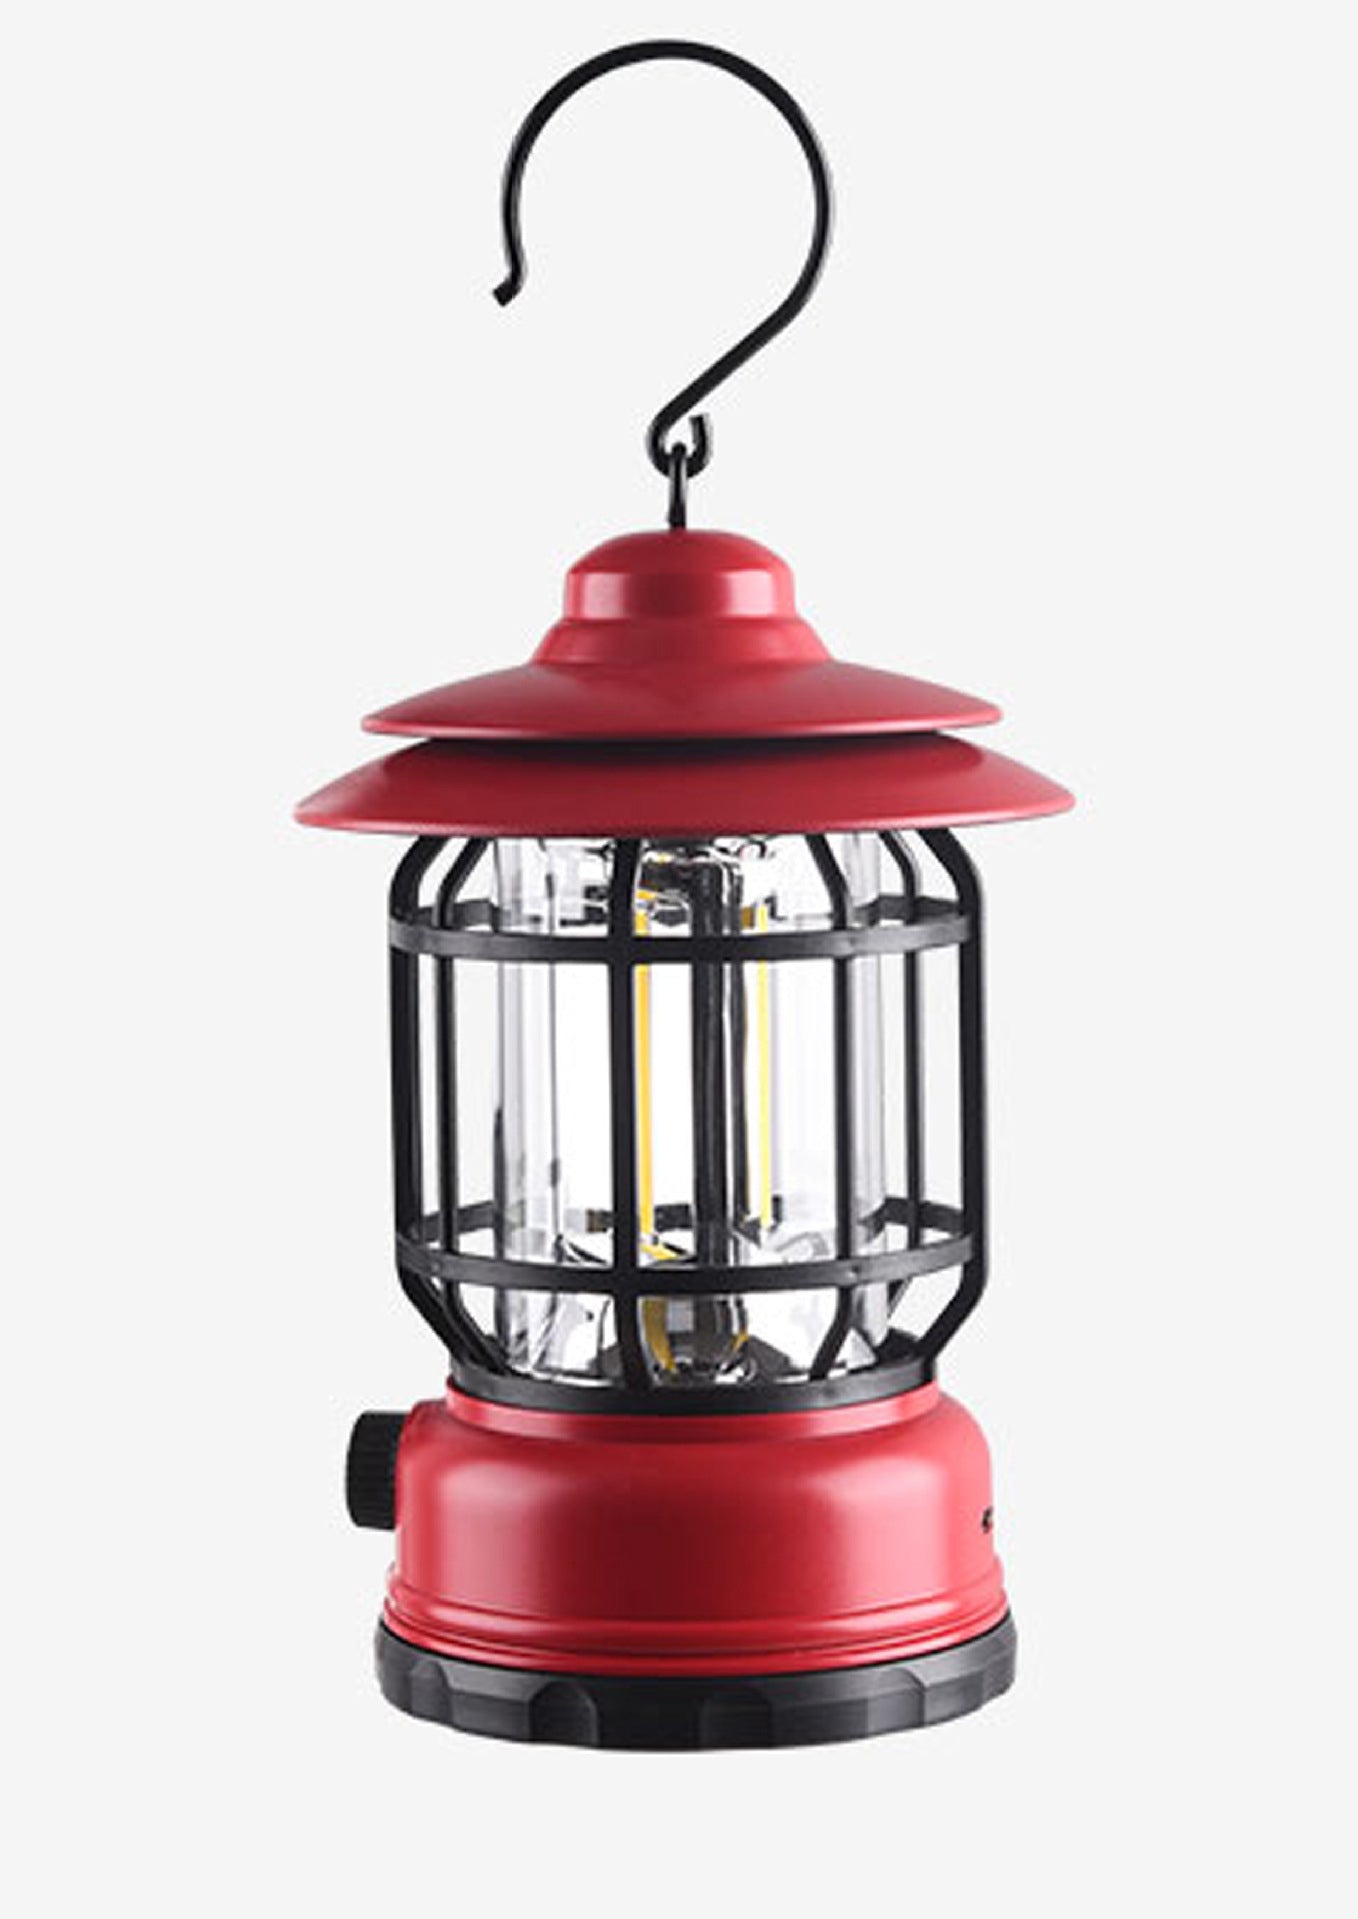 This retro lantern is a must-have for camping and exploring! It's rechargeable, multi-functional, and has an eye-catching design - perfect for making a statement. Enjoy safe and cool illumination any time, anywhere.